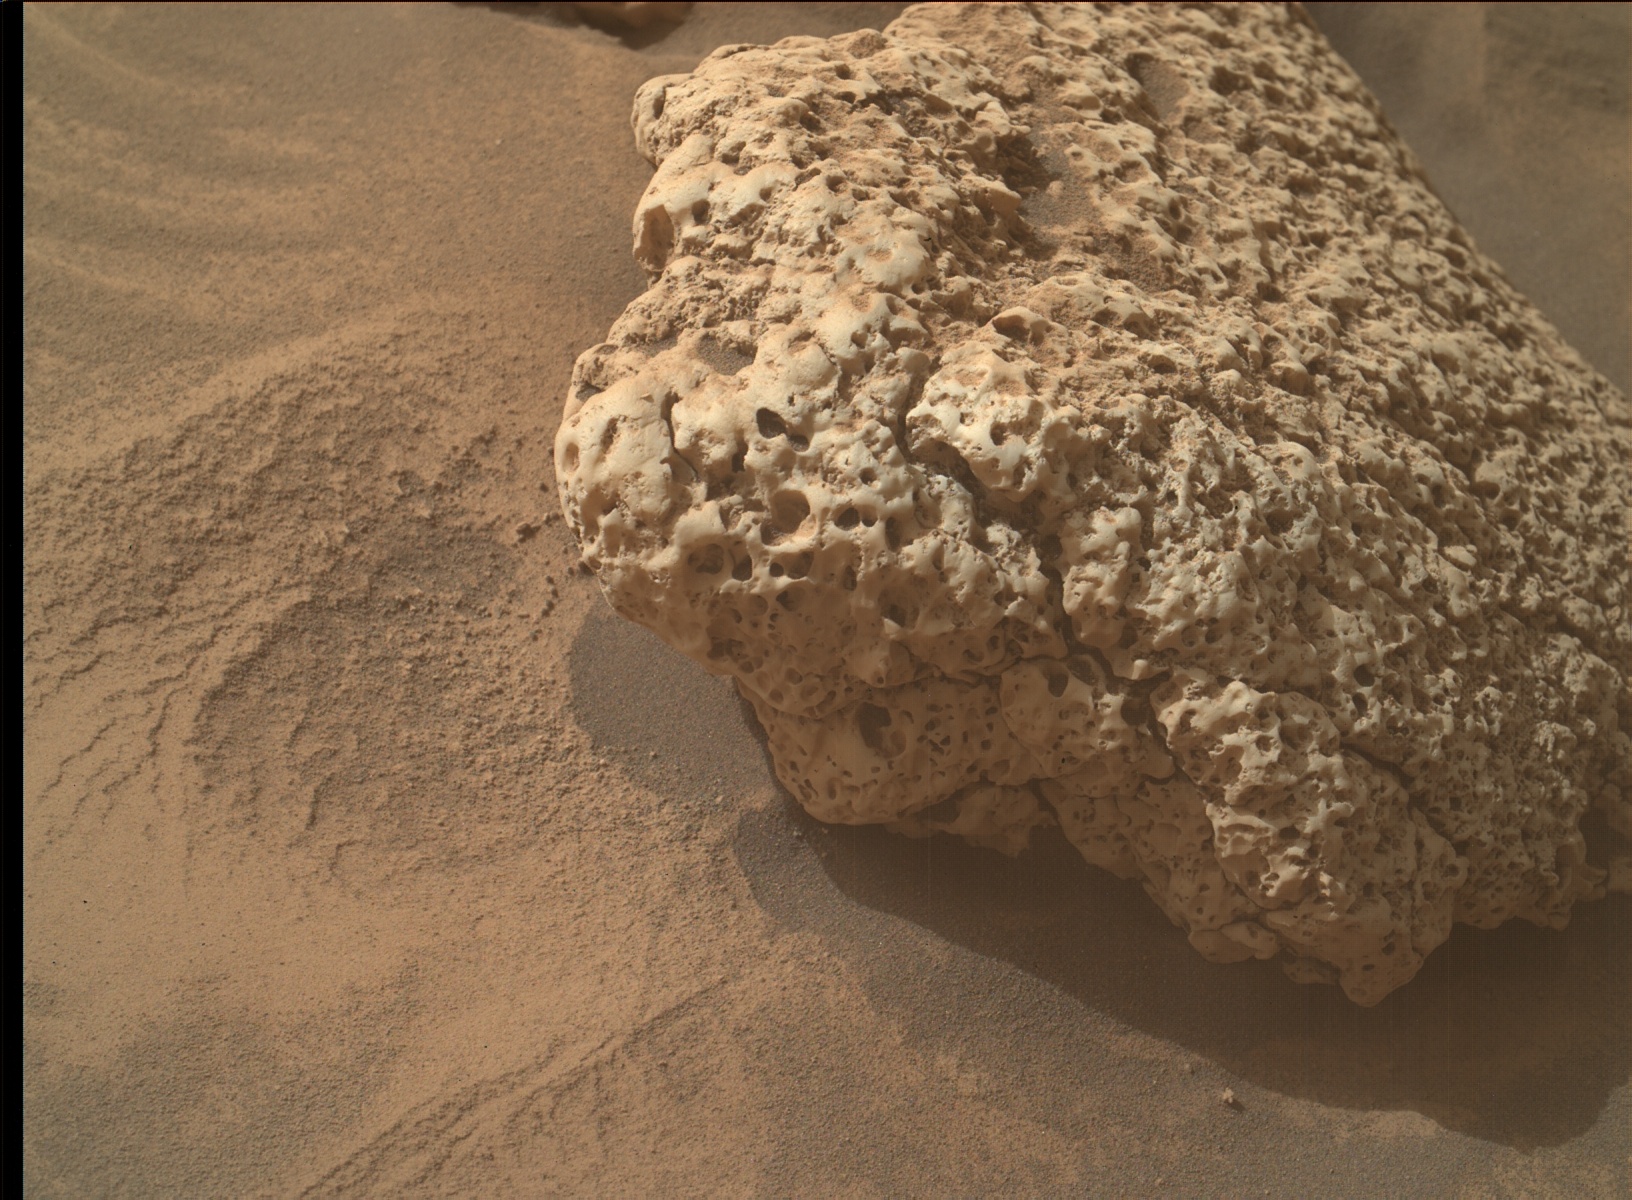 On a Martian surface covered in fine, powdery, brownish-orange soil, a large pockmarked rock – resembling a natural sponge – dominates half of the frame, extending from the upper-right corner to the center.